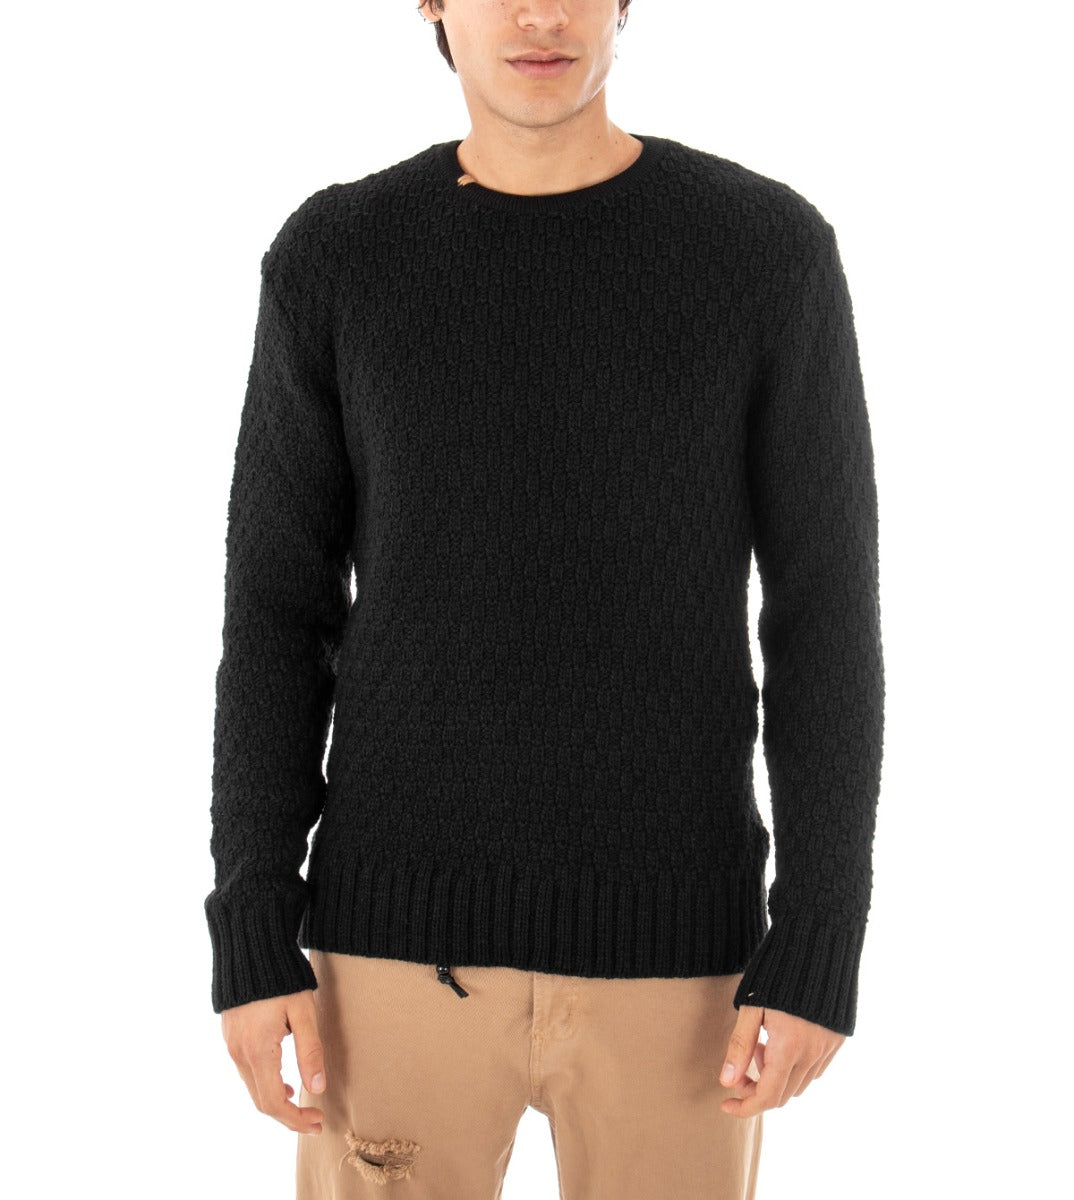 Paul Barrell Men's Sweater Solid Color Black Crewneck Casual Basic Pullover GIOSAL